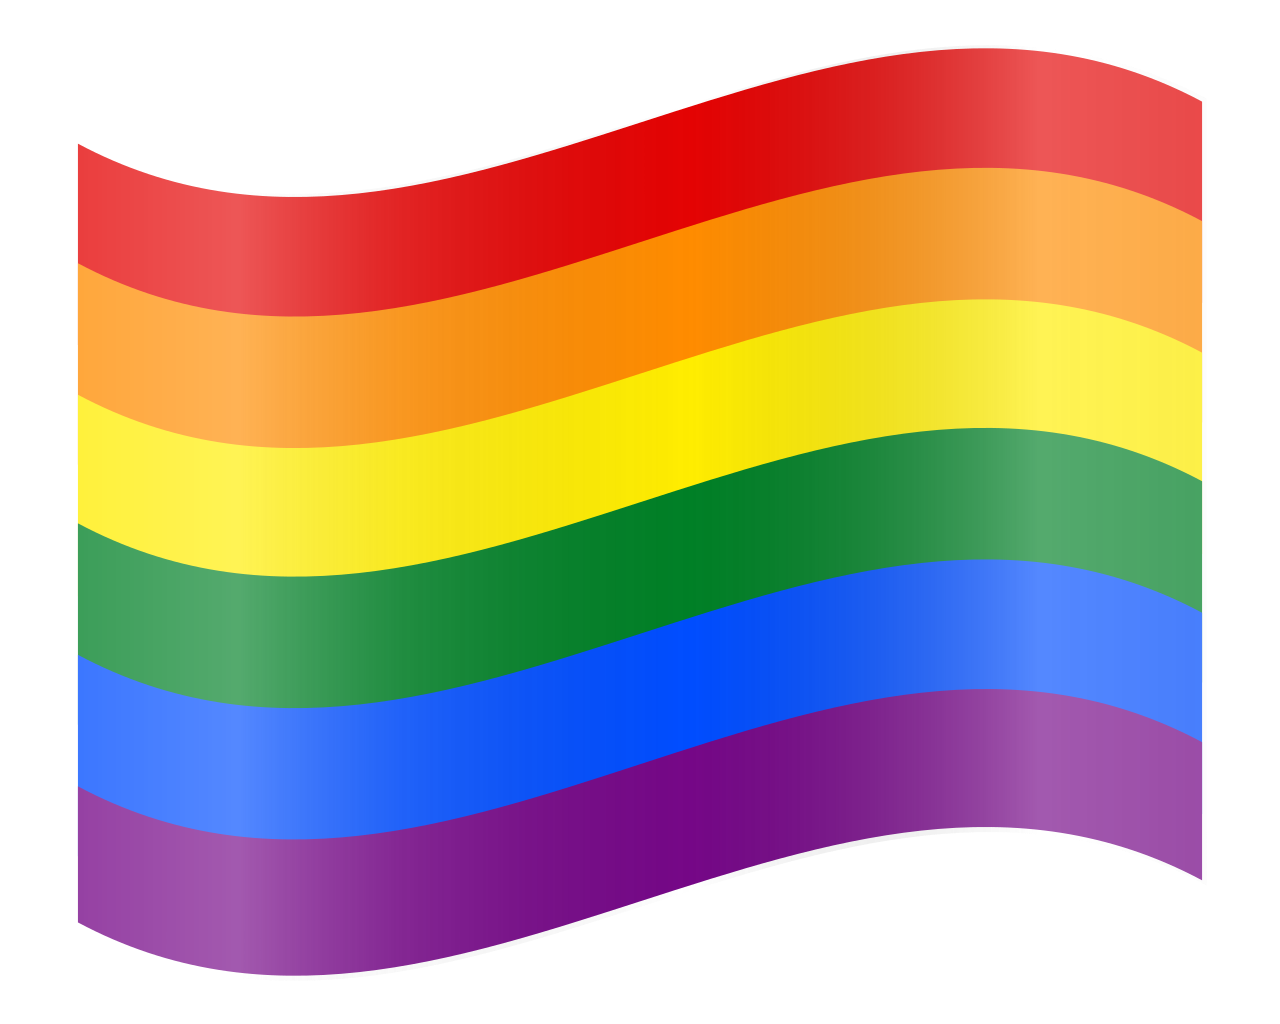 Download File:Nuvola LGBT flag borderless.svg - Wikimedia Commons